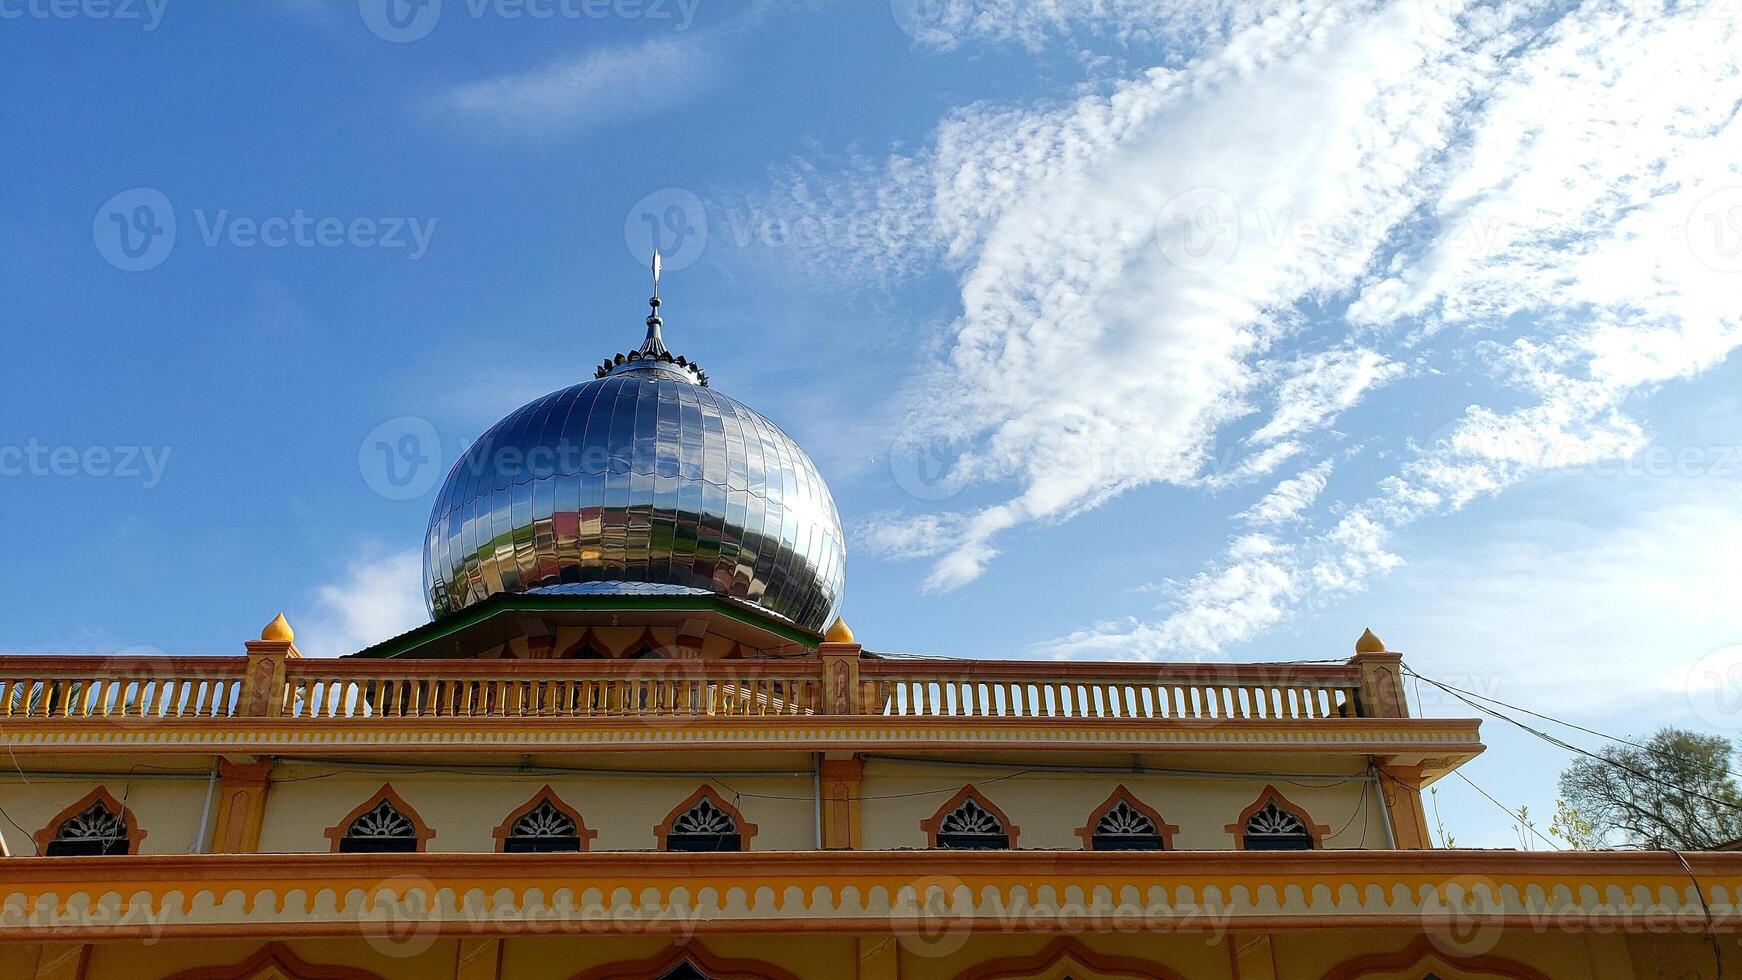 View of the mosque's transitional dome during the day with a cloudy sky in the background. Good for writing greetings and good for posting on social media photo